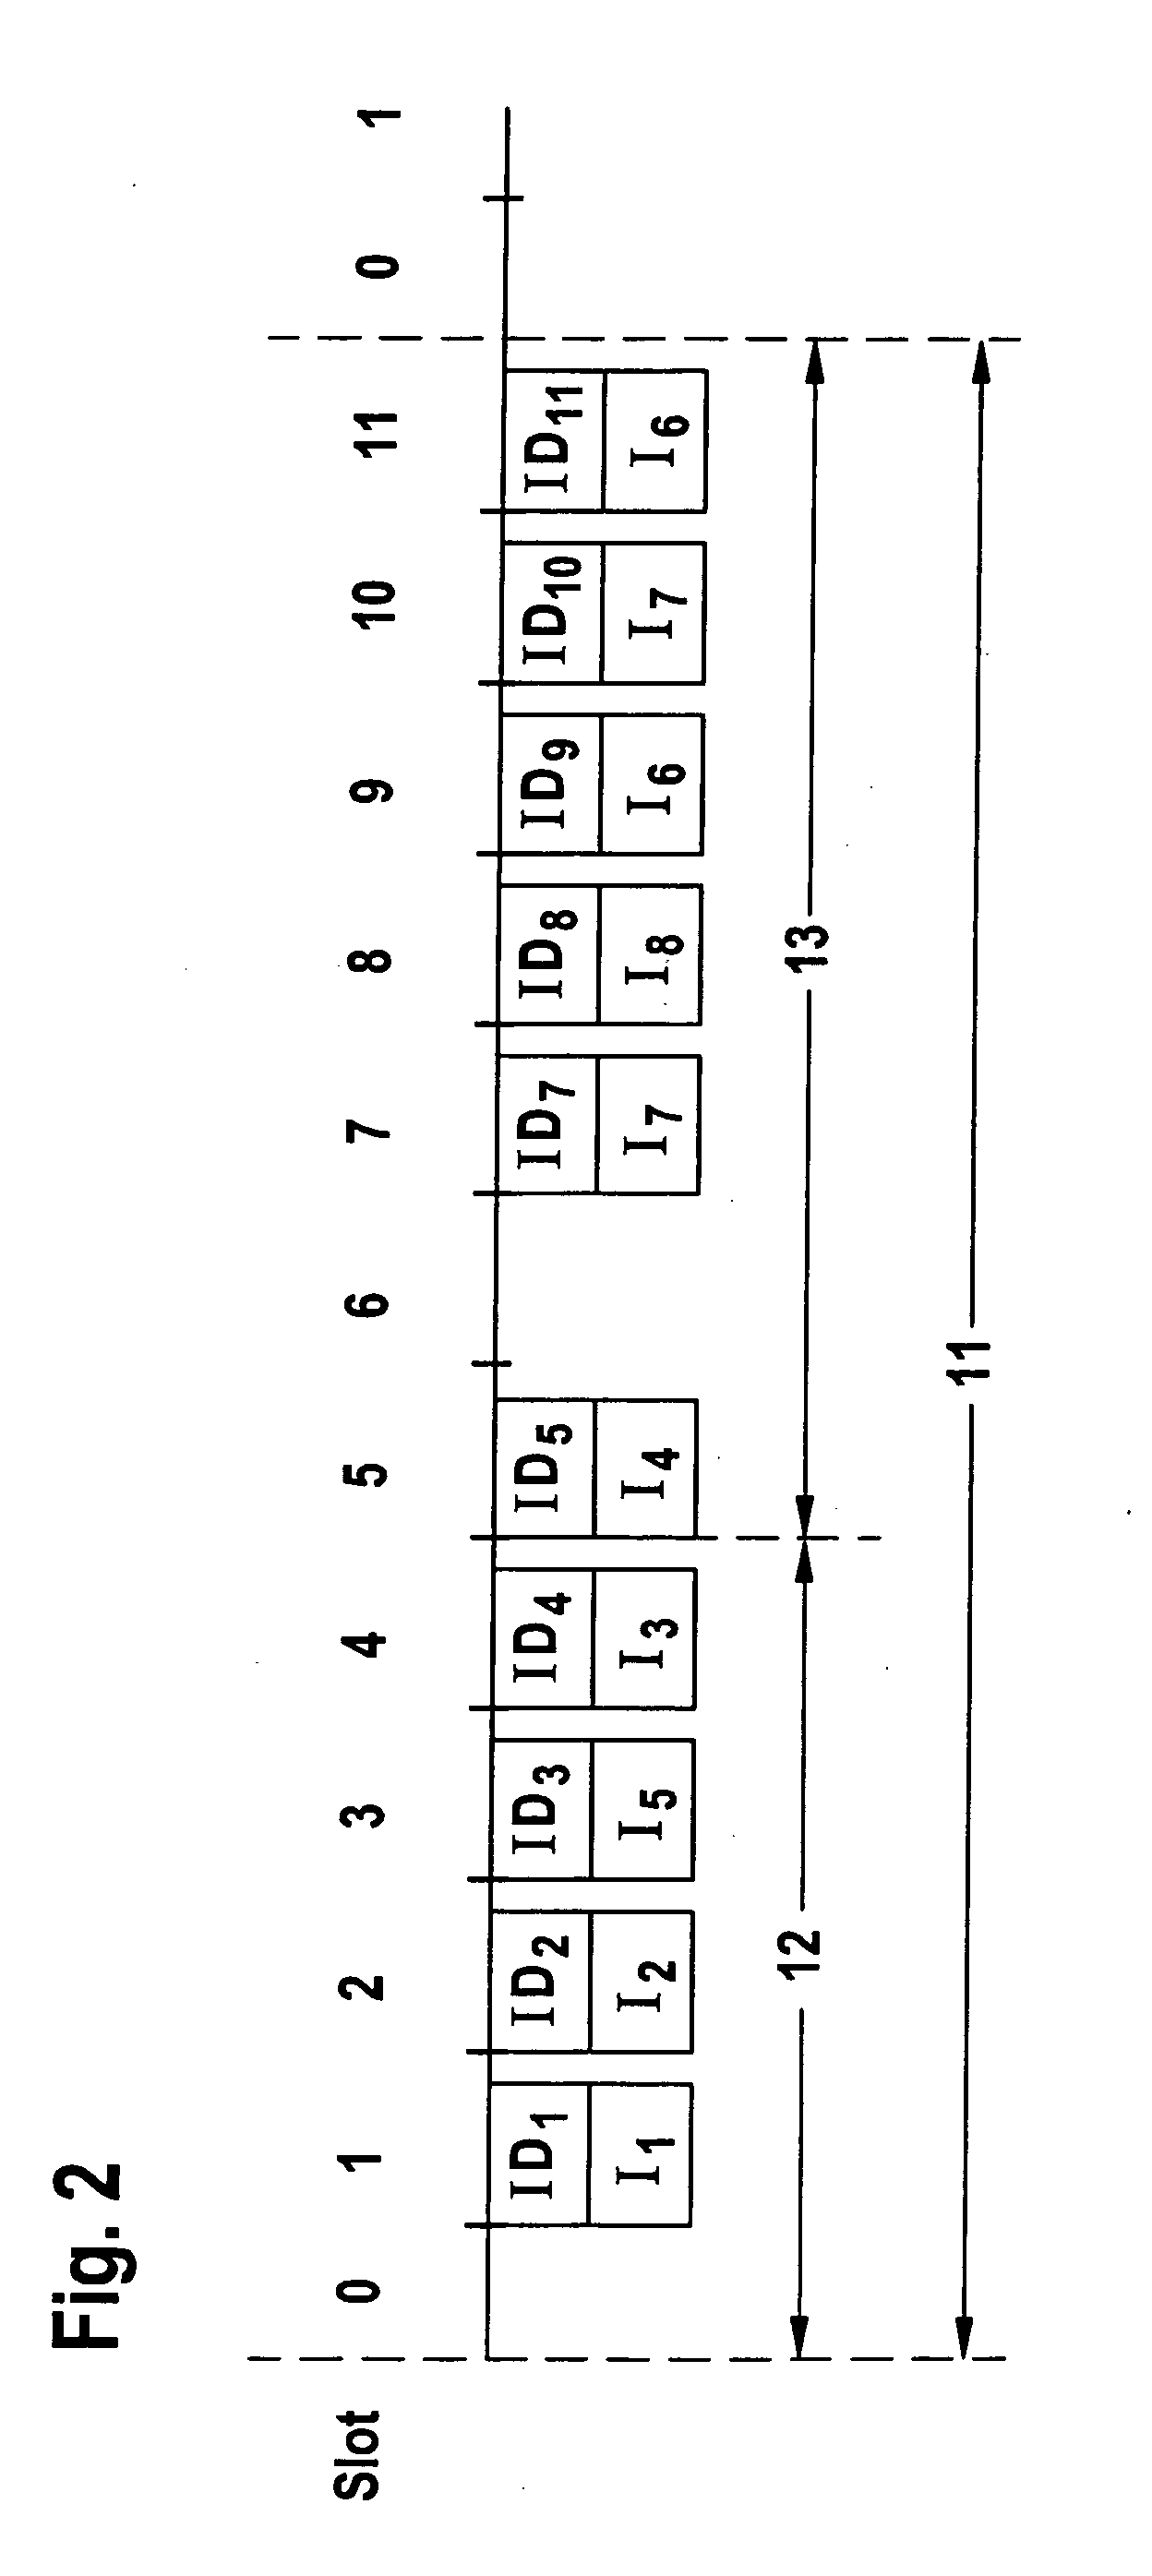 Method and Communications System for Transmitting Information in a Motor Vehicle